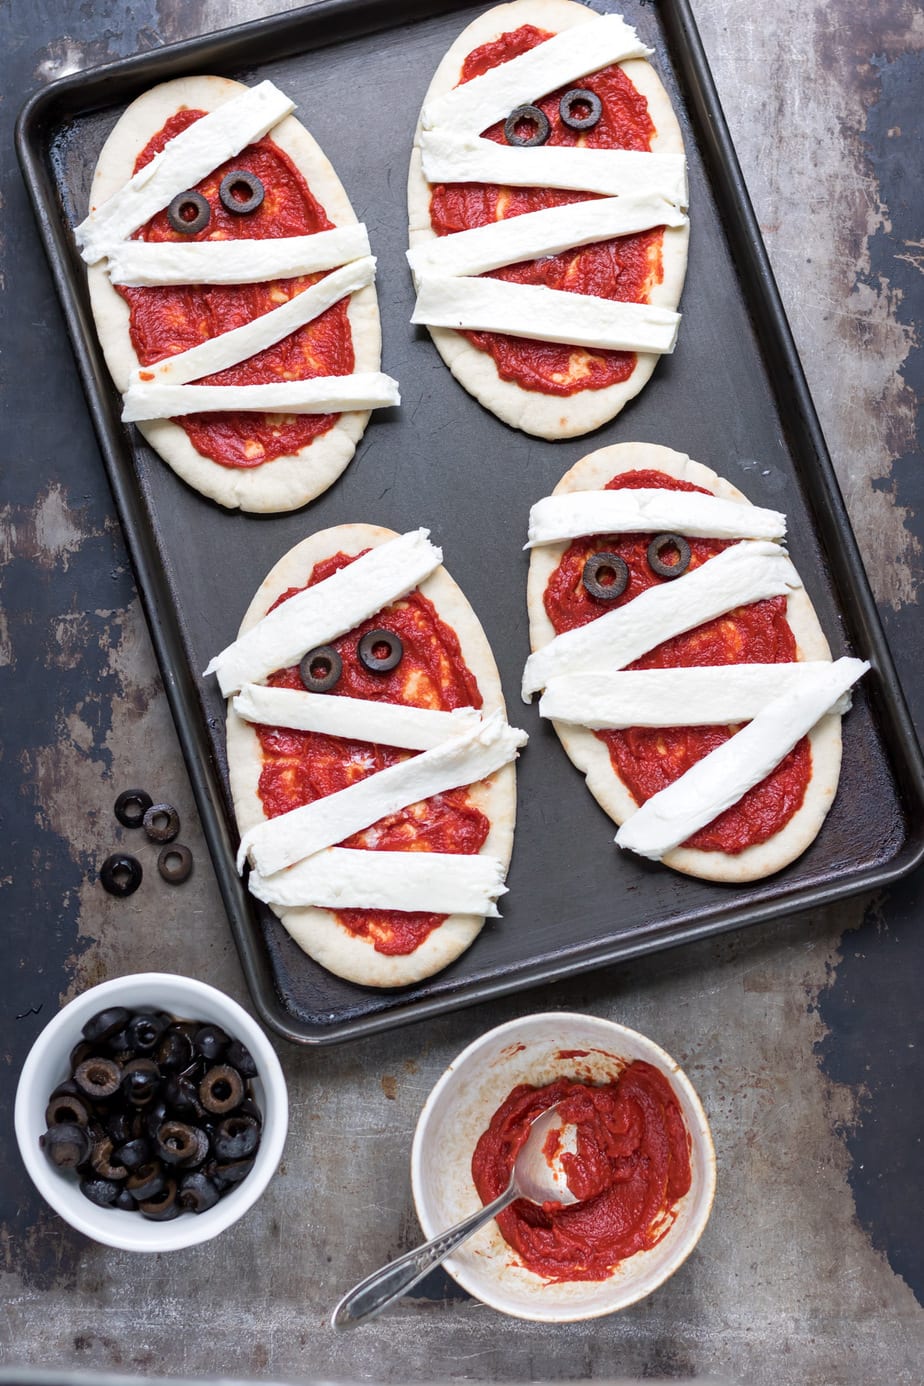 Pitas on a baking tray with pizza sauce and strips of mozzarella to look like mummies, with olives for eyes.